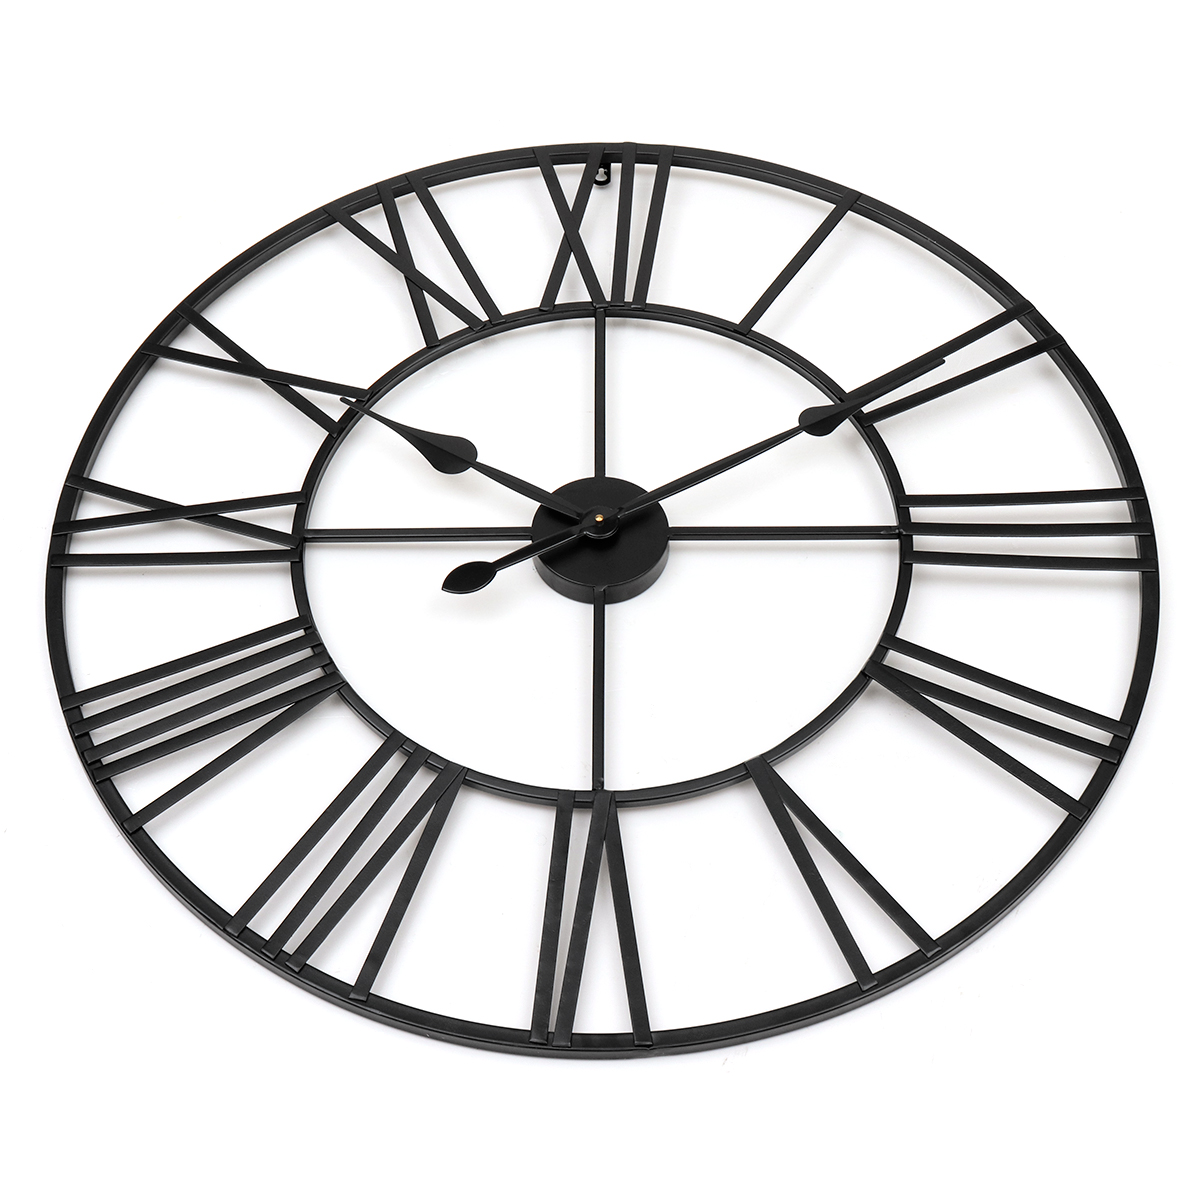 Find 80cm Large Outdoor Garden Wall Clock Roman Numerals Giant Open Face Metal for Sale on Gipsybee.com with cryptocurrencies